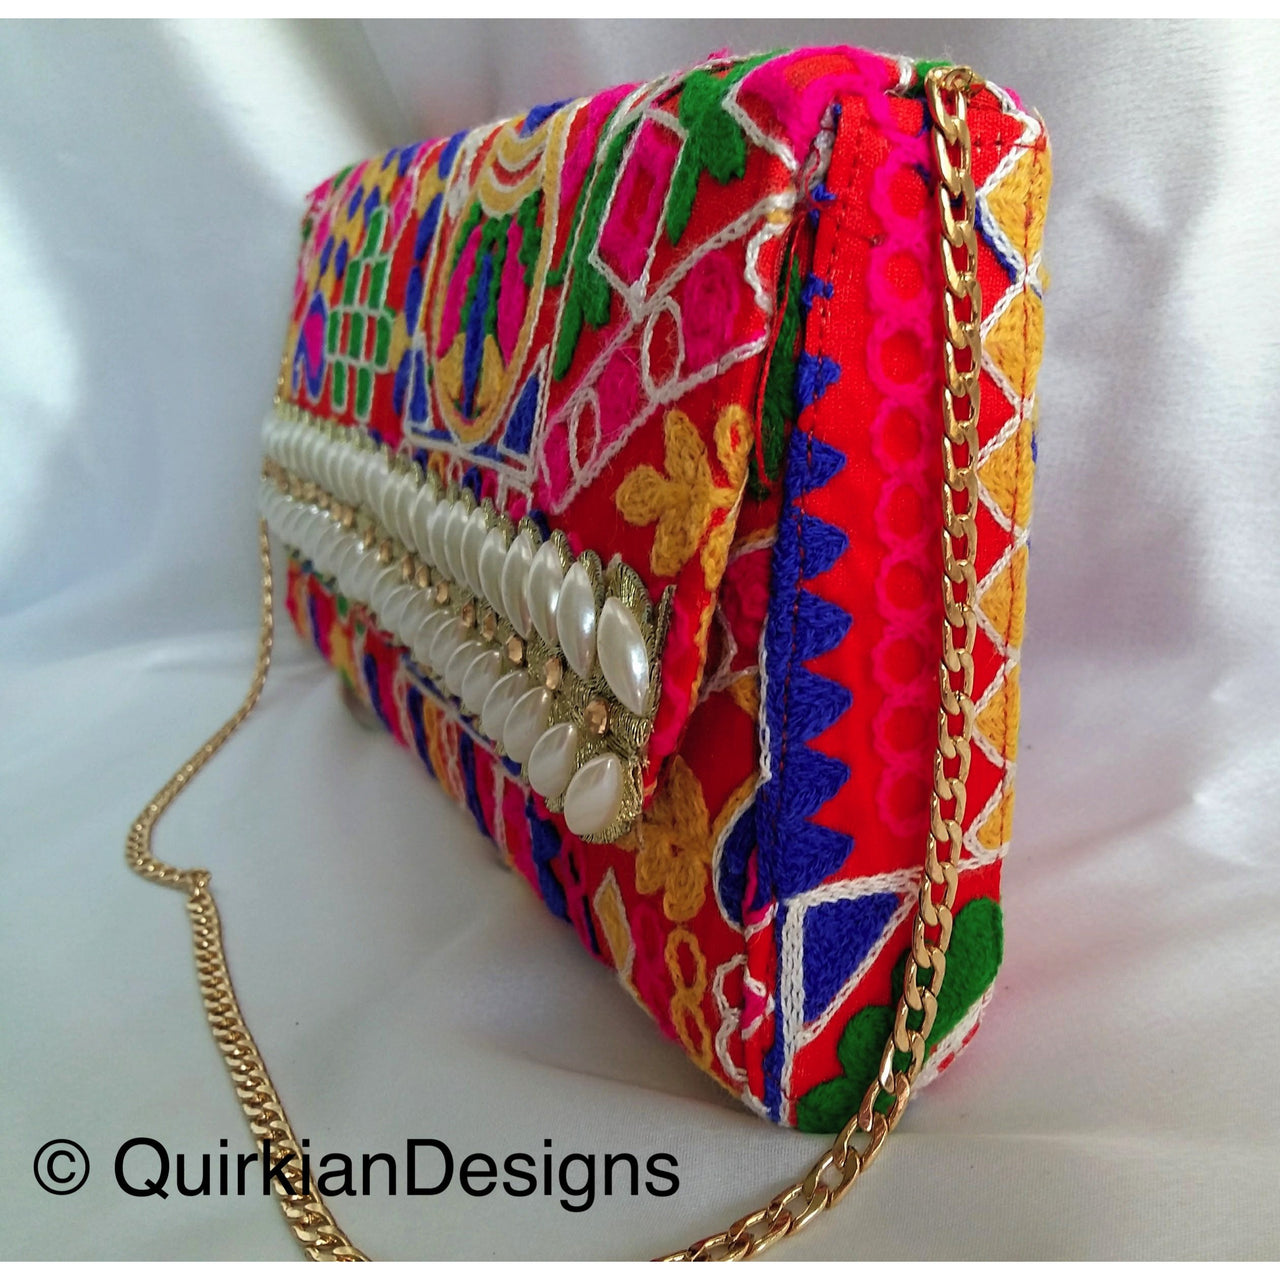 Red Fabric Clutch Purse With Floral Embroidery In Green, Yellow, Blue And Pink Threadwork & Pearl Beads Detail, Wedding Clutch, Boho Clutch